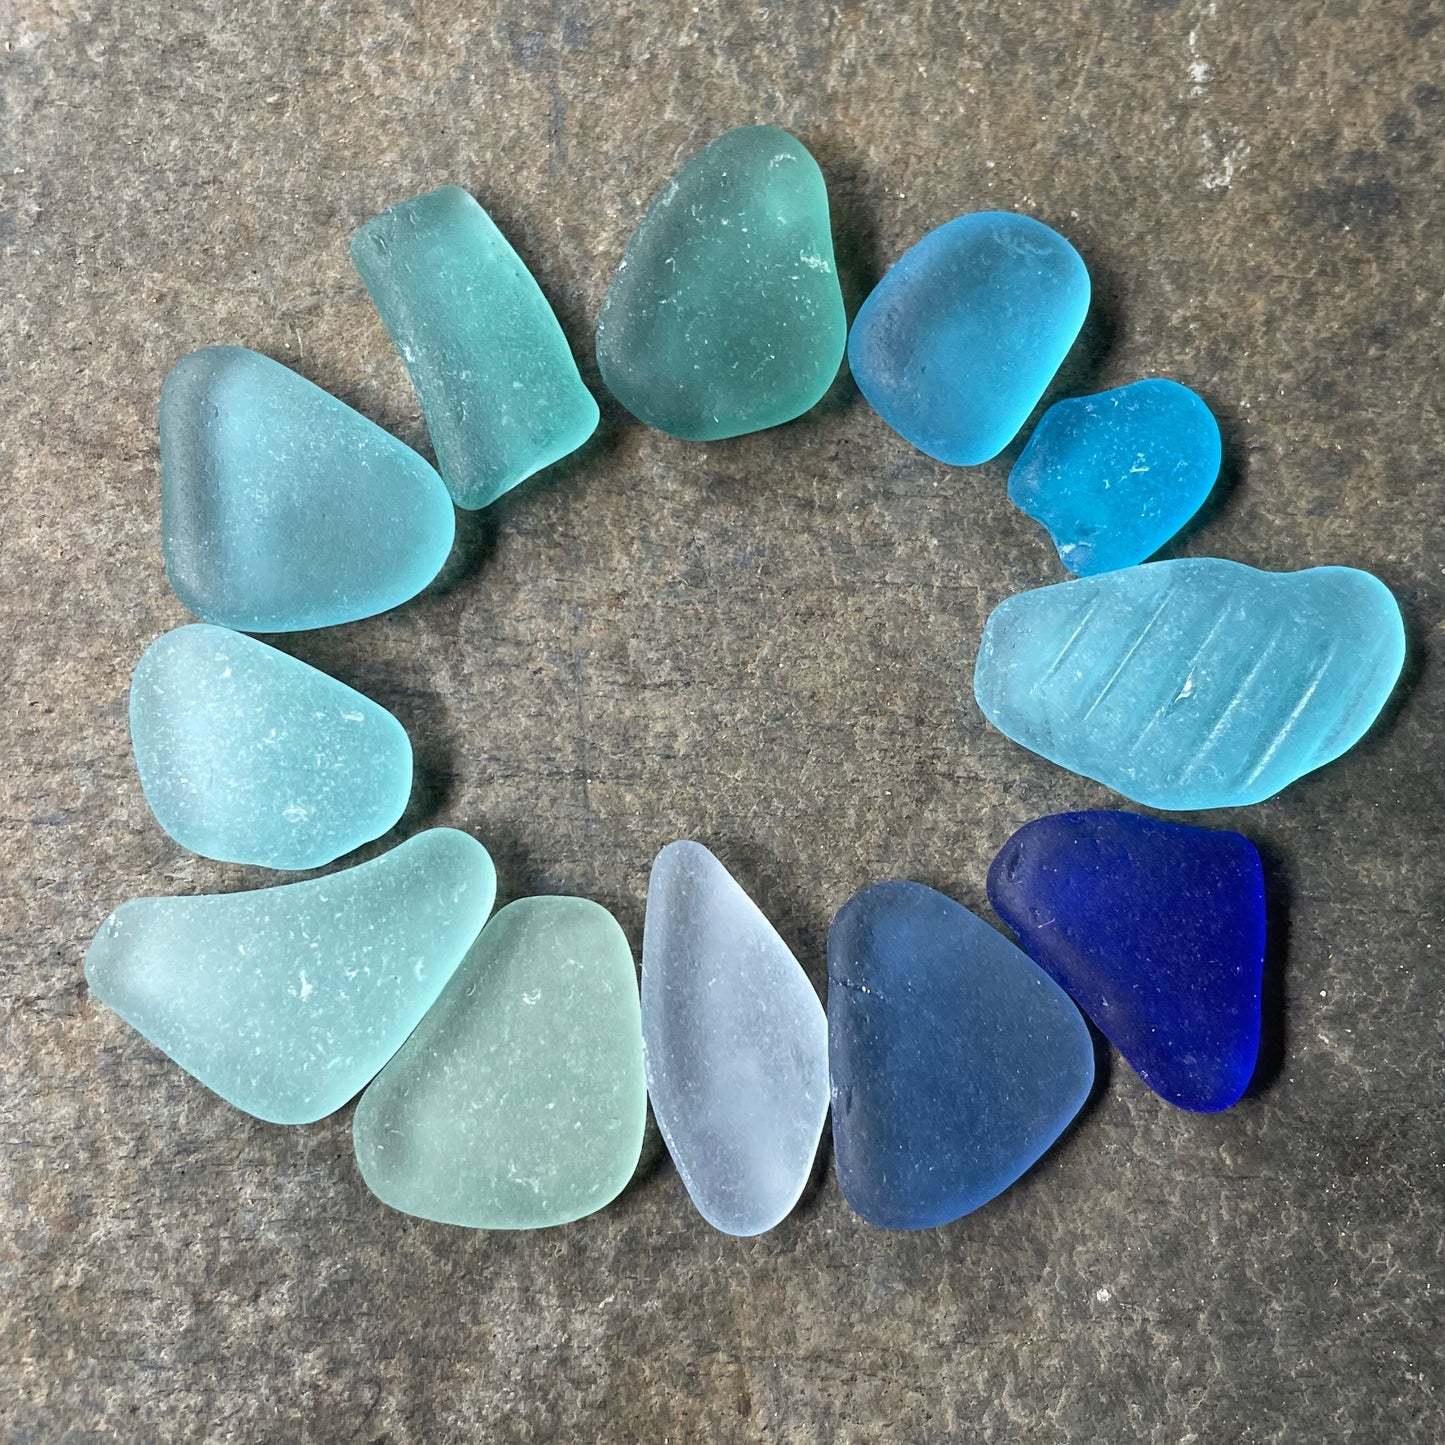 A collection of sea glass in shades of blue including cobalt blue, dark blue, cornflower, aqua and turquoise.